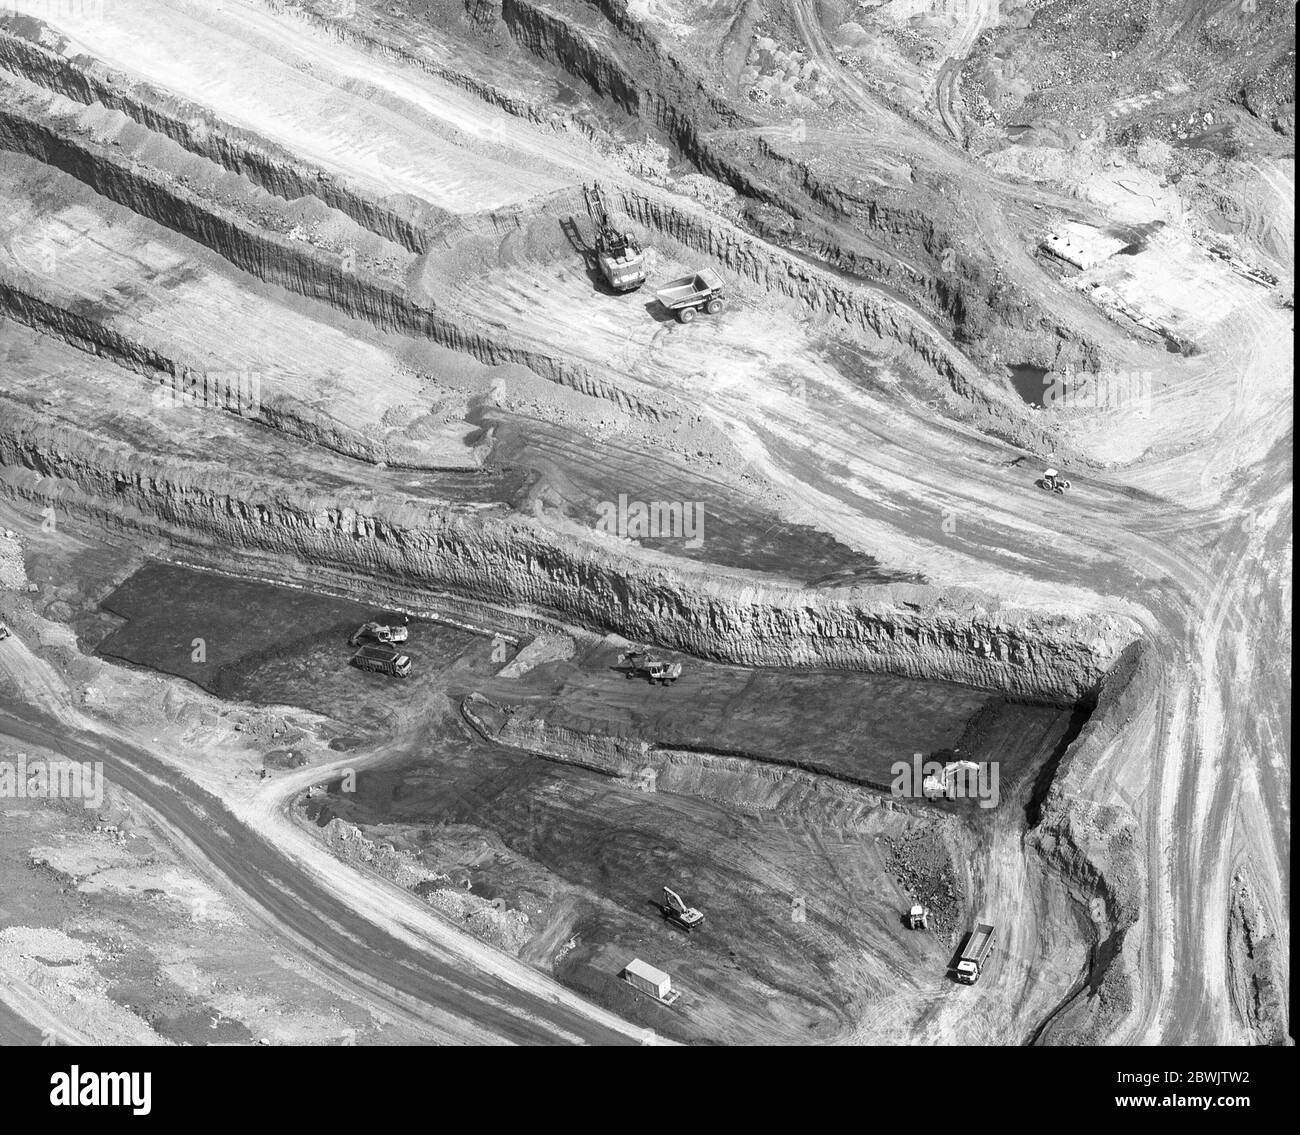 1995, Opencast mining site at Kirk, East Midlands, Central England, UK Stock Photo